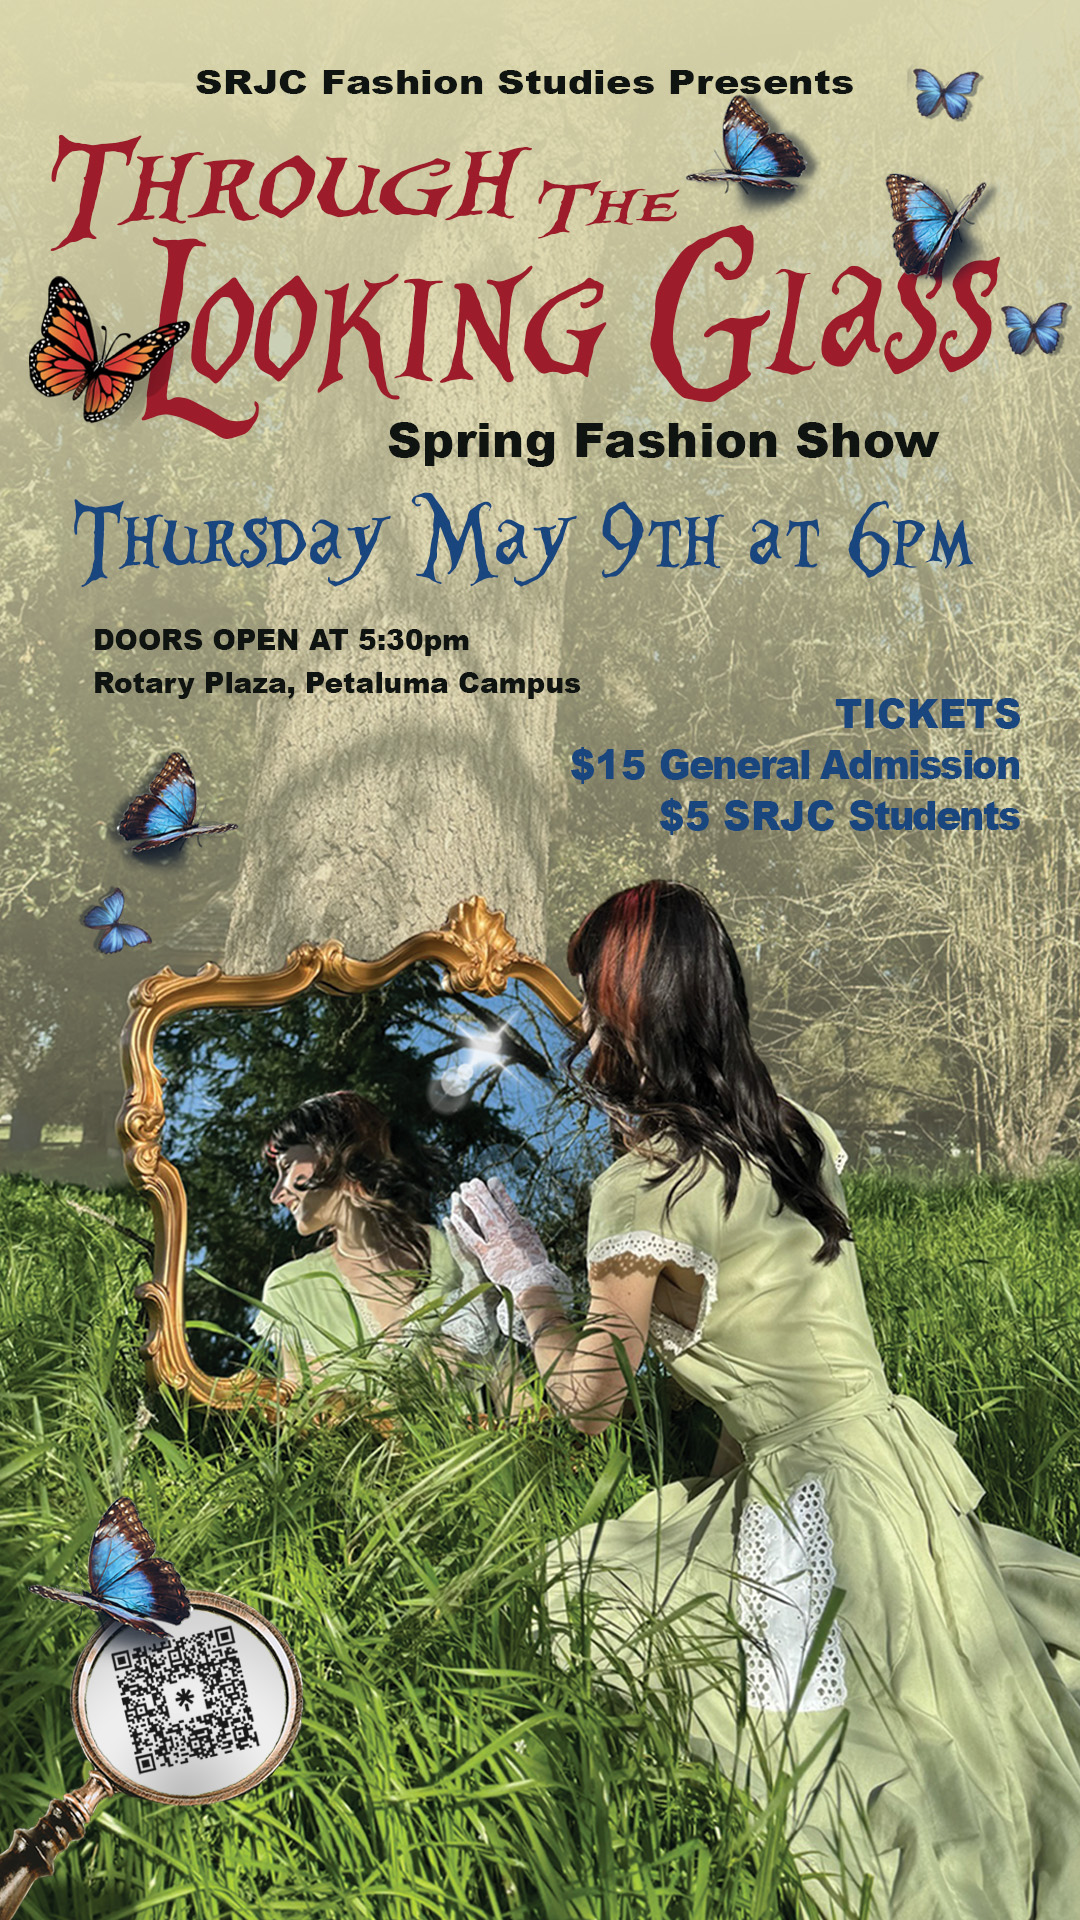 SRJC Fashion Studies Presents Through the Looking Glass Spring Fashion Show Thursday May 9th at 6pm Doors Open at 5:30PM Rotary Plaza, Petaluma Campus TICKETS $15 General Admission $5 SRJC Students